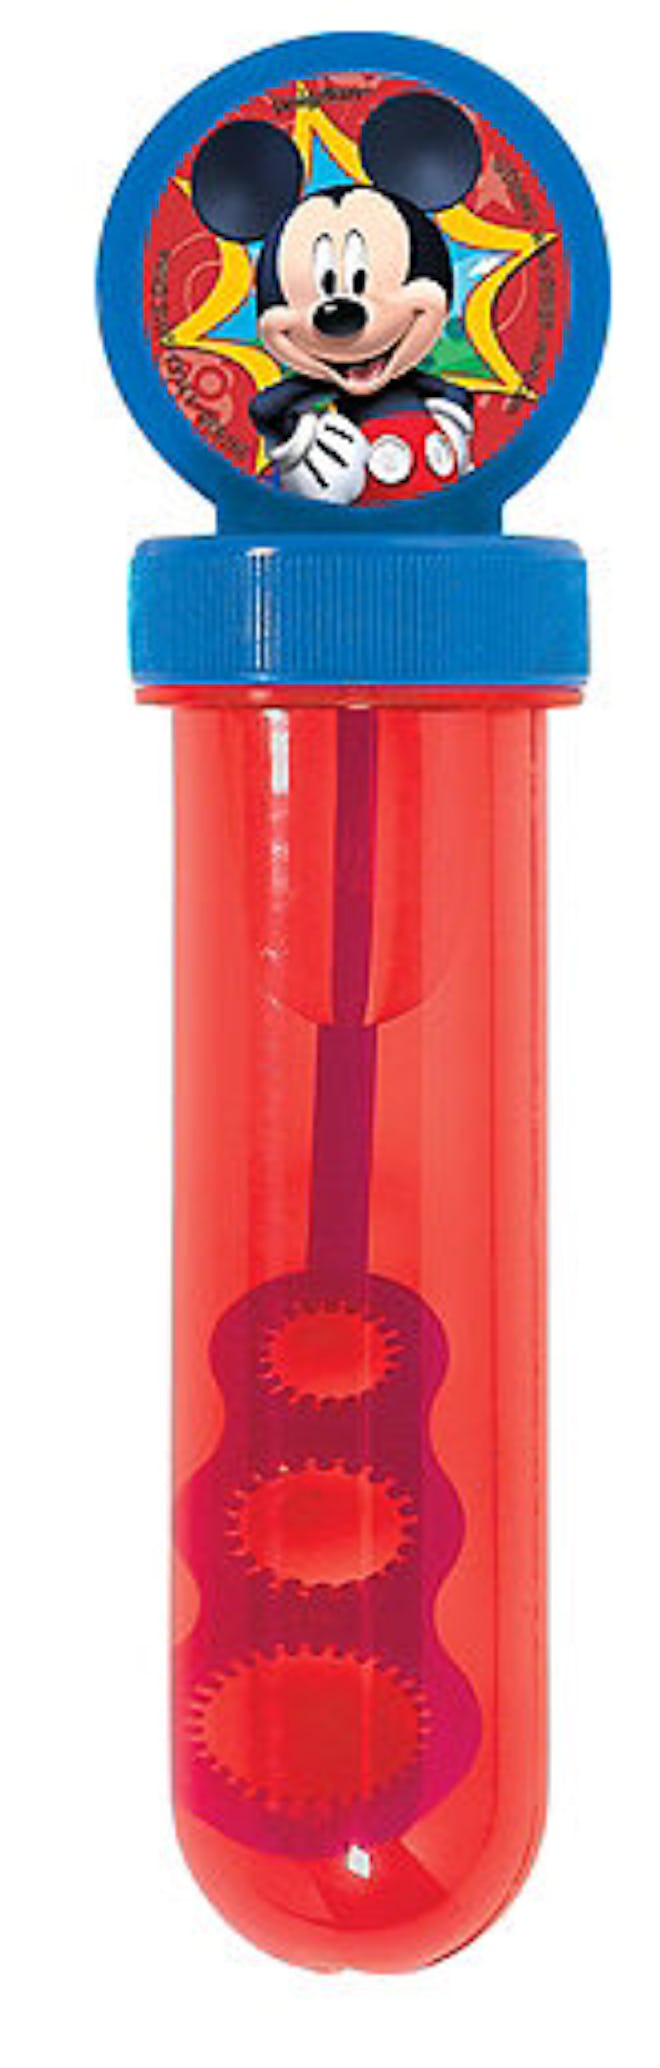 Image of a tube of bubbles, with a Mickey Mouse character topper.